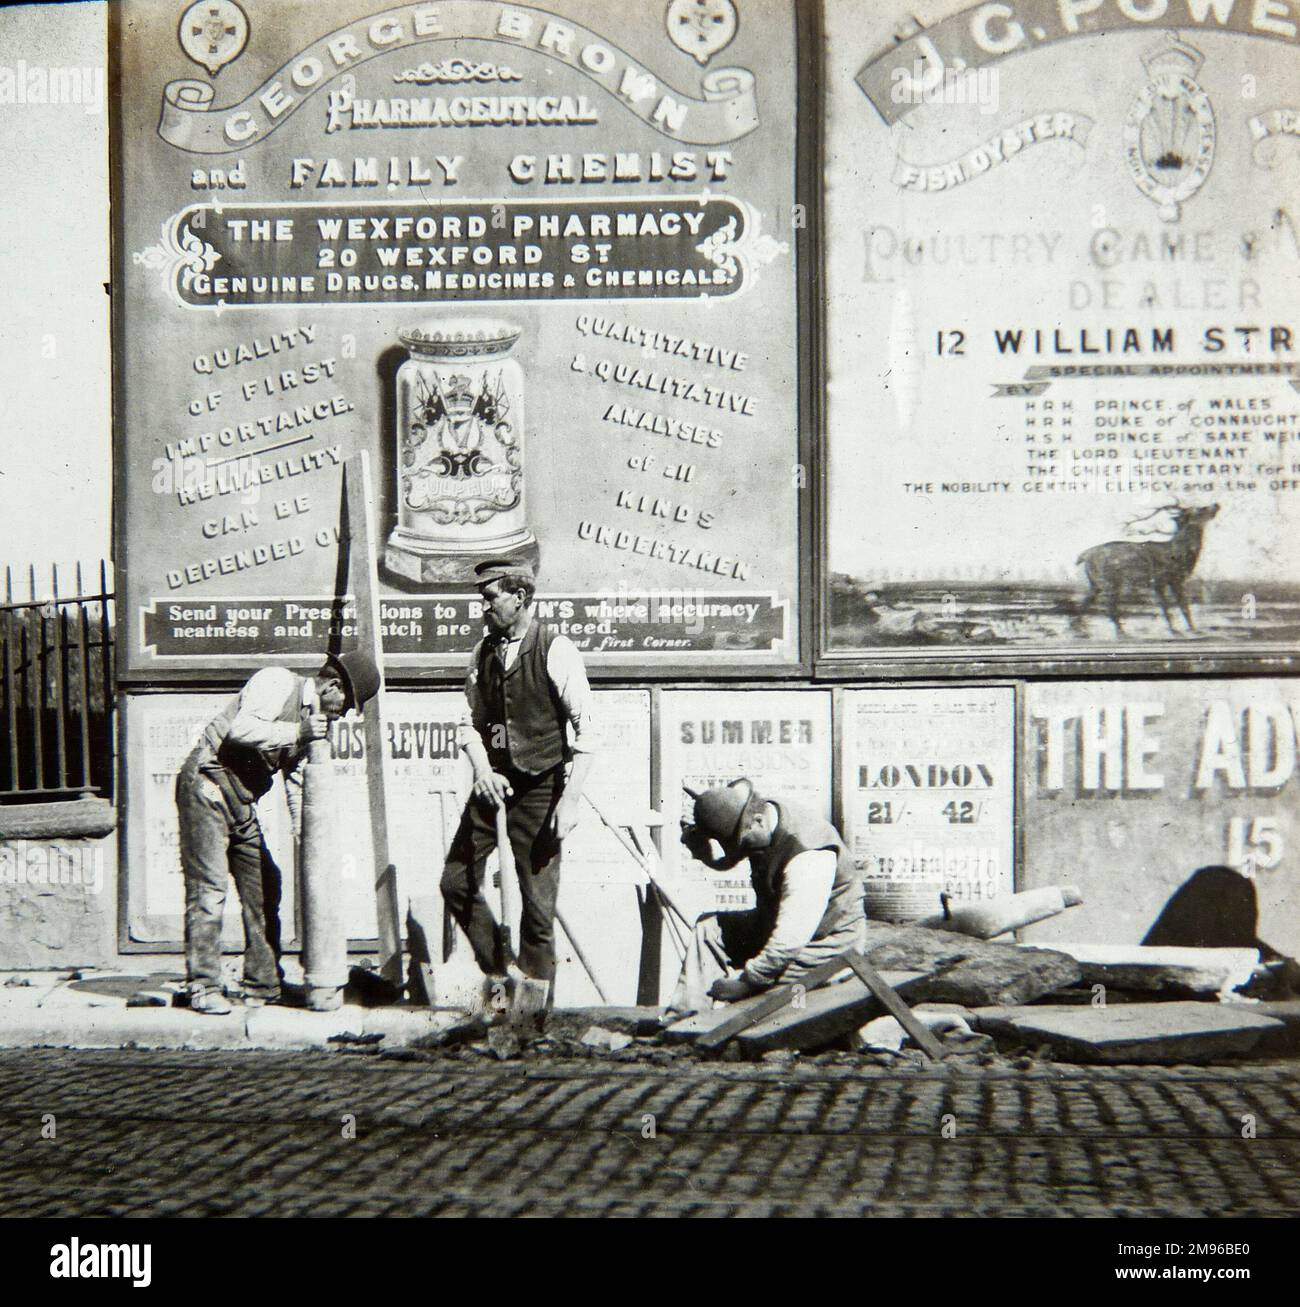 Three men busy doing street repairs in Dublin, Ireland.  The man on the left is laying a paving slab.  There are some rather ornate advertisements on the hoarding behind them, one for a family chemist, and one for a poultry, game and fish dealer. Stock Photo